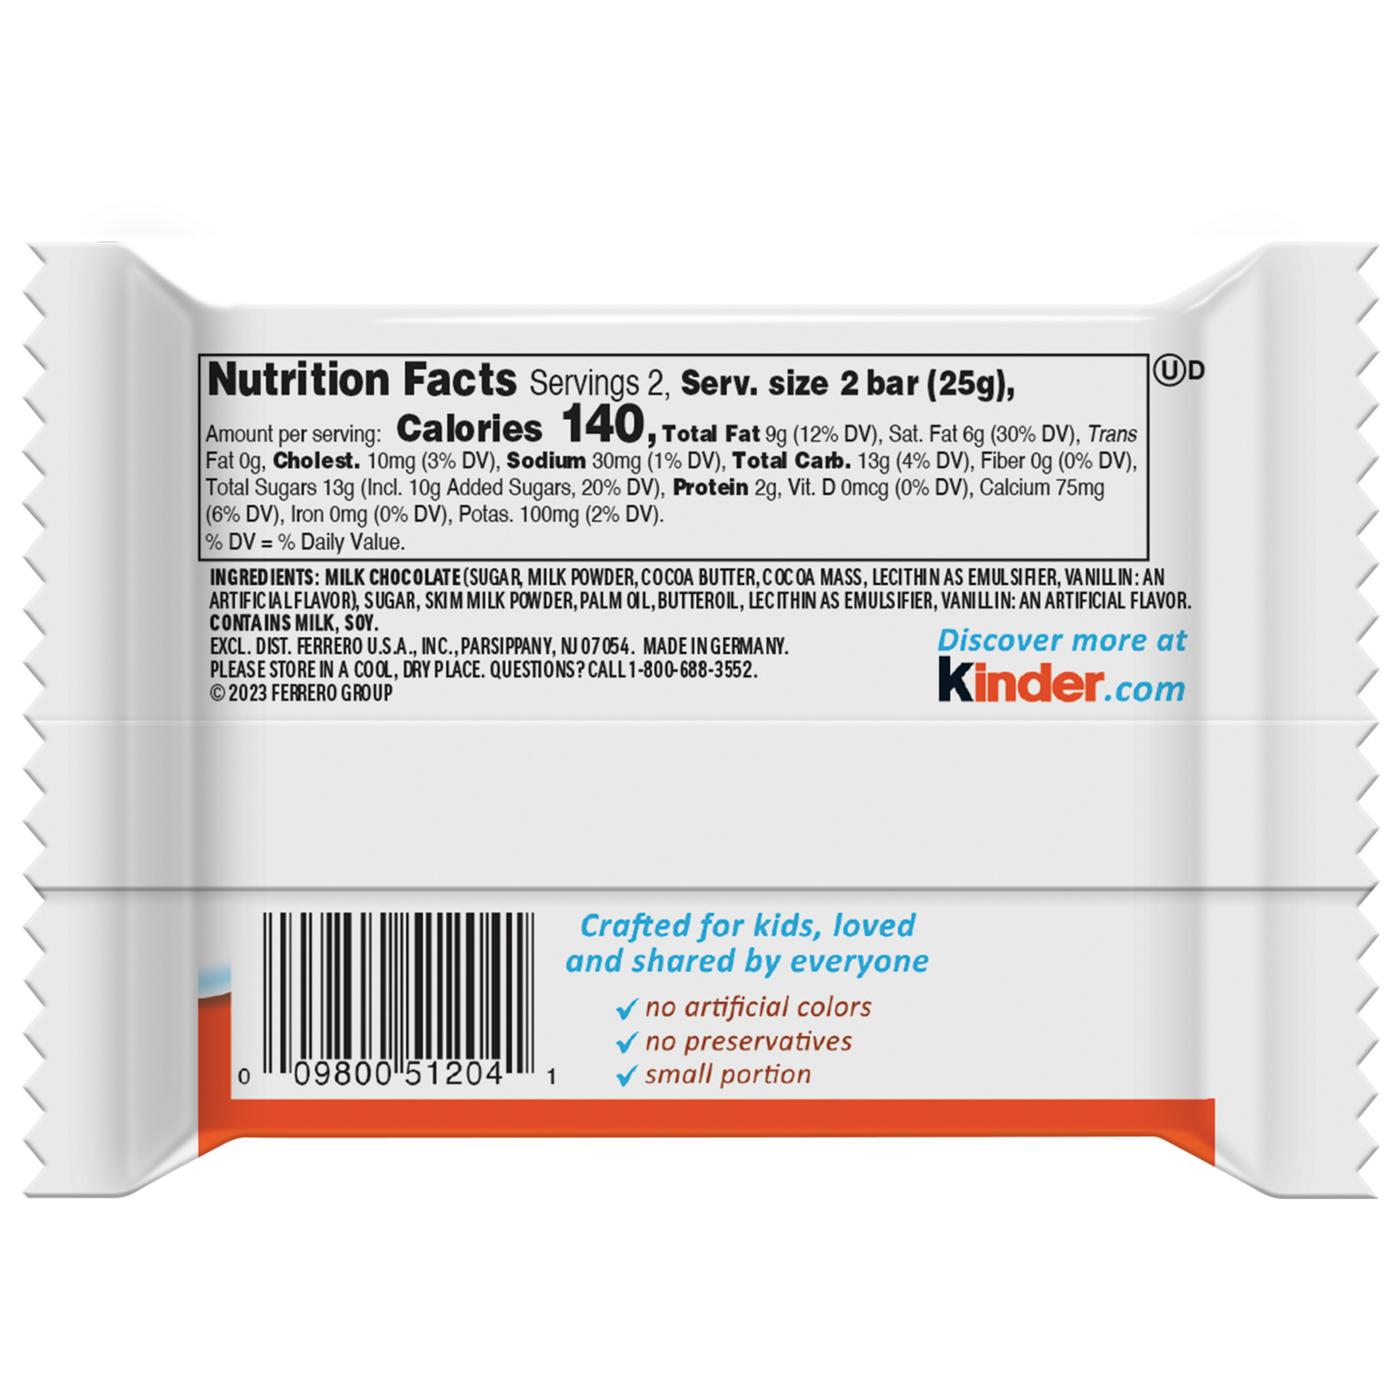 Kinder Chocolate with Creamy Milky Filling Candy Bars; image 4 of 5